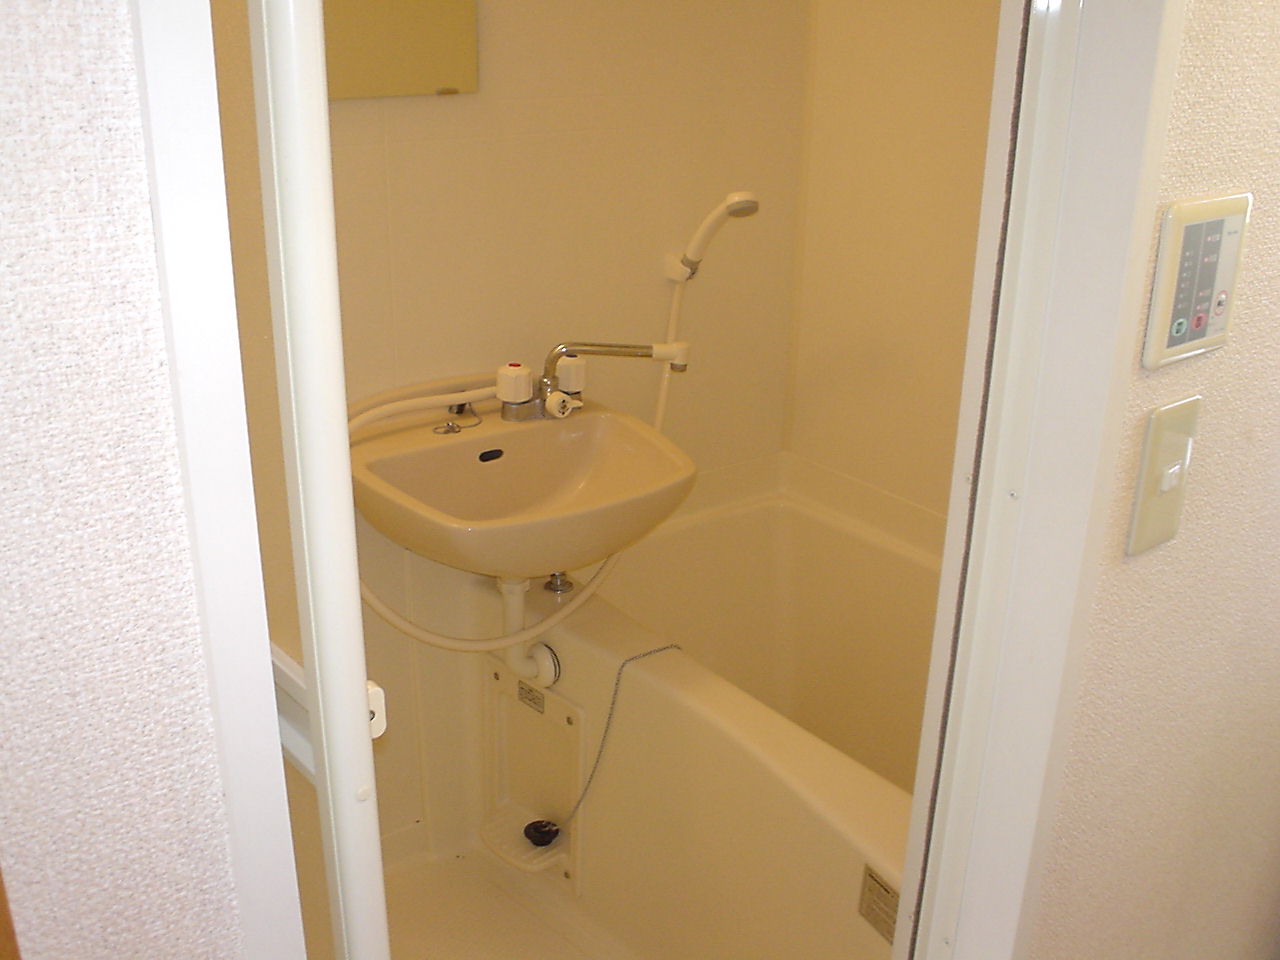 Bath. It is a bathroom with a shower. It is with a bathroom ventilation dryer.